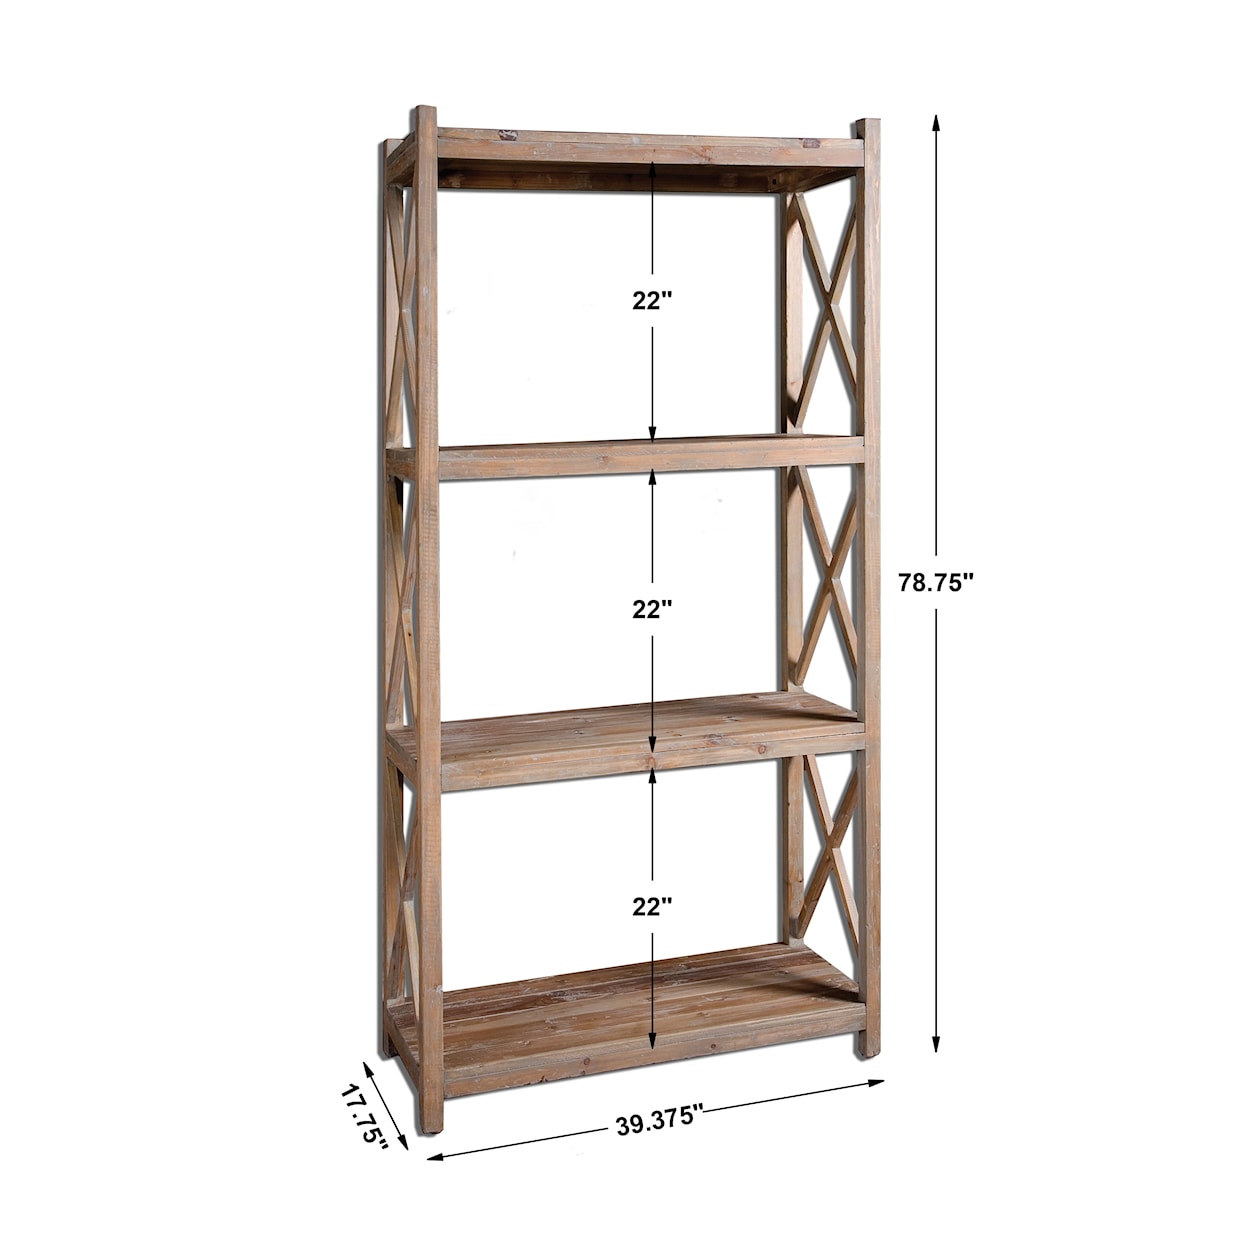 Uttermost Accent Furniture - Bookcases Stratford Etagere